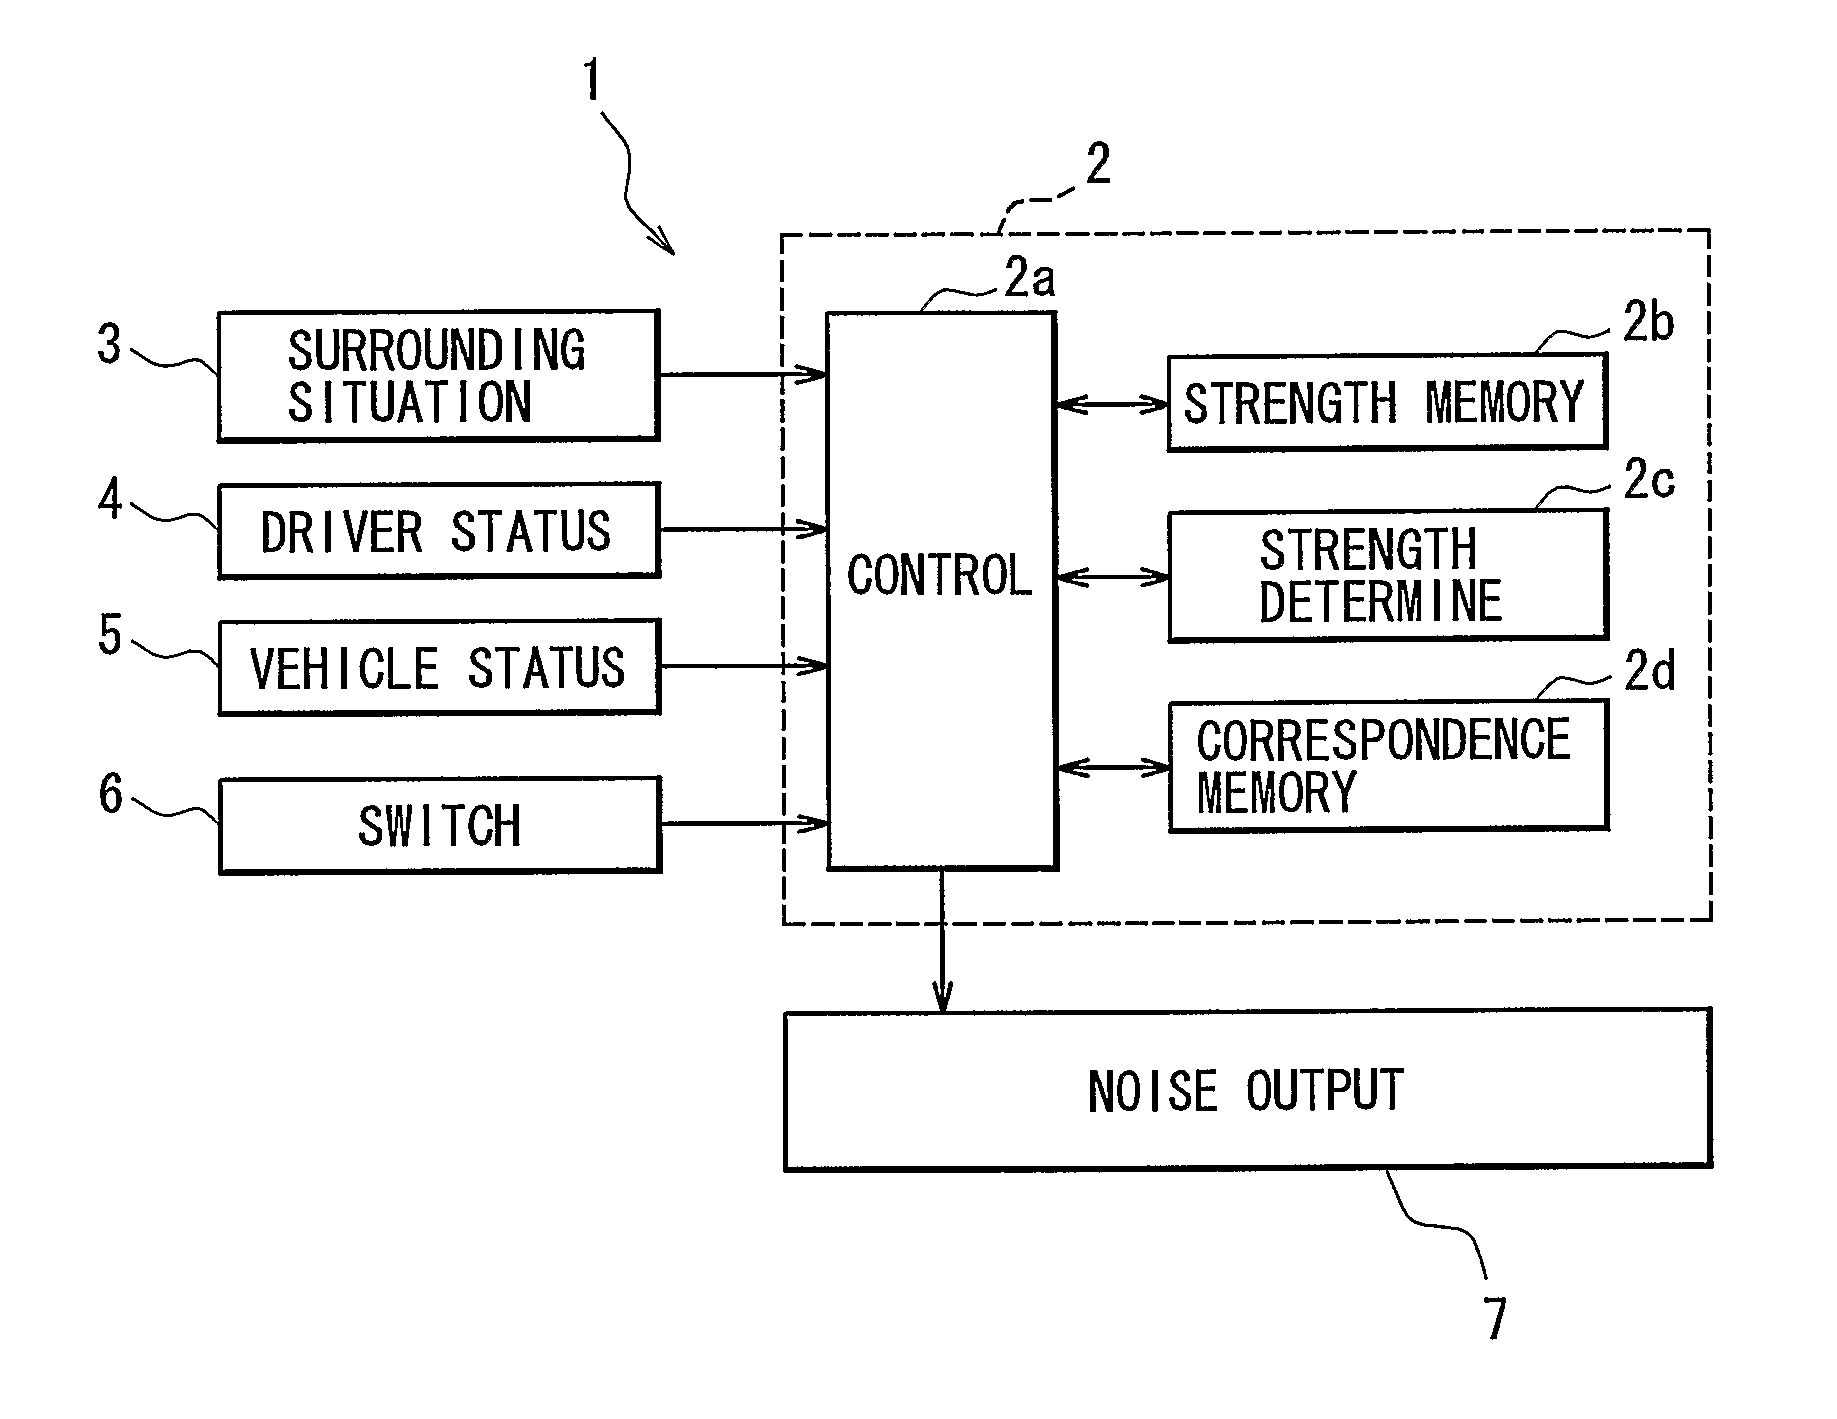 Visual ability improvement supporting device